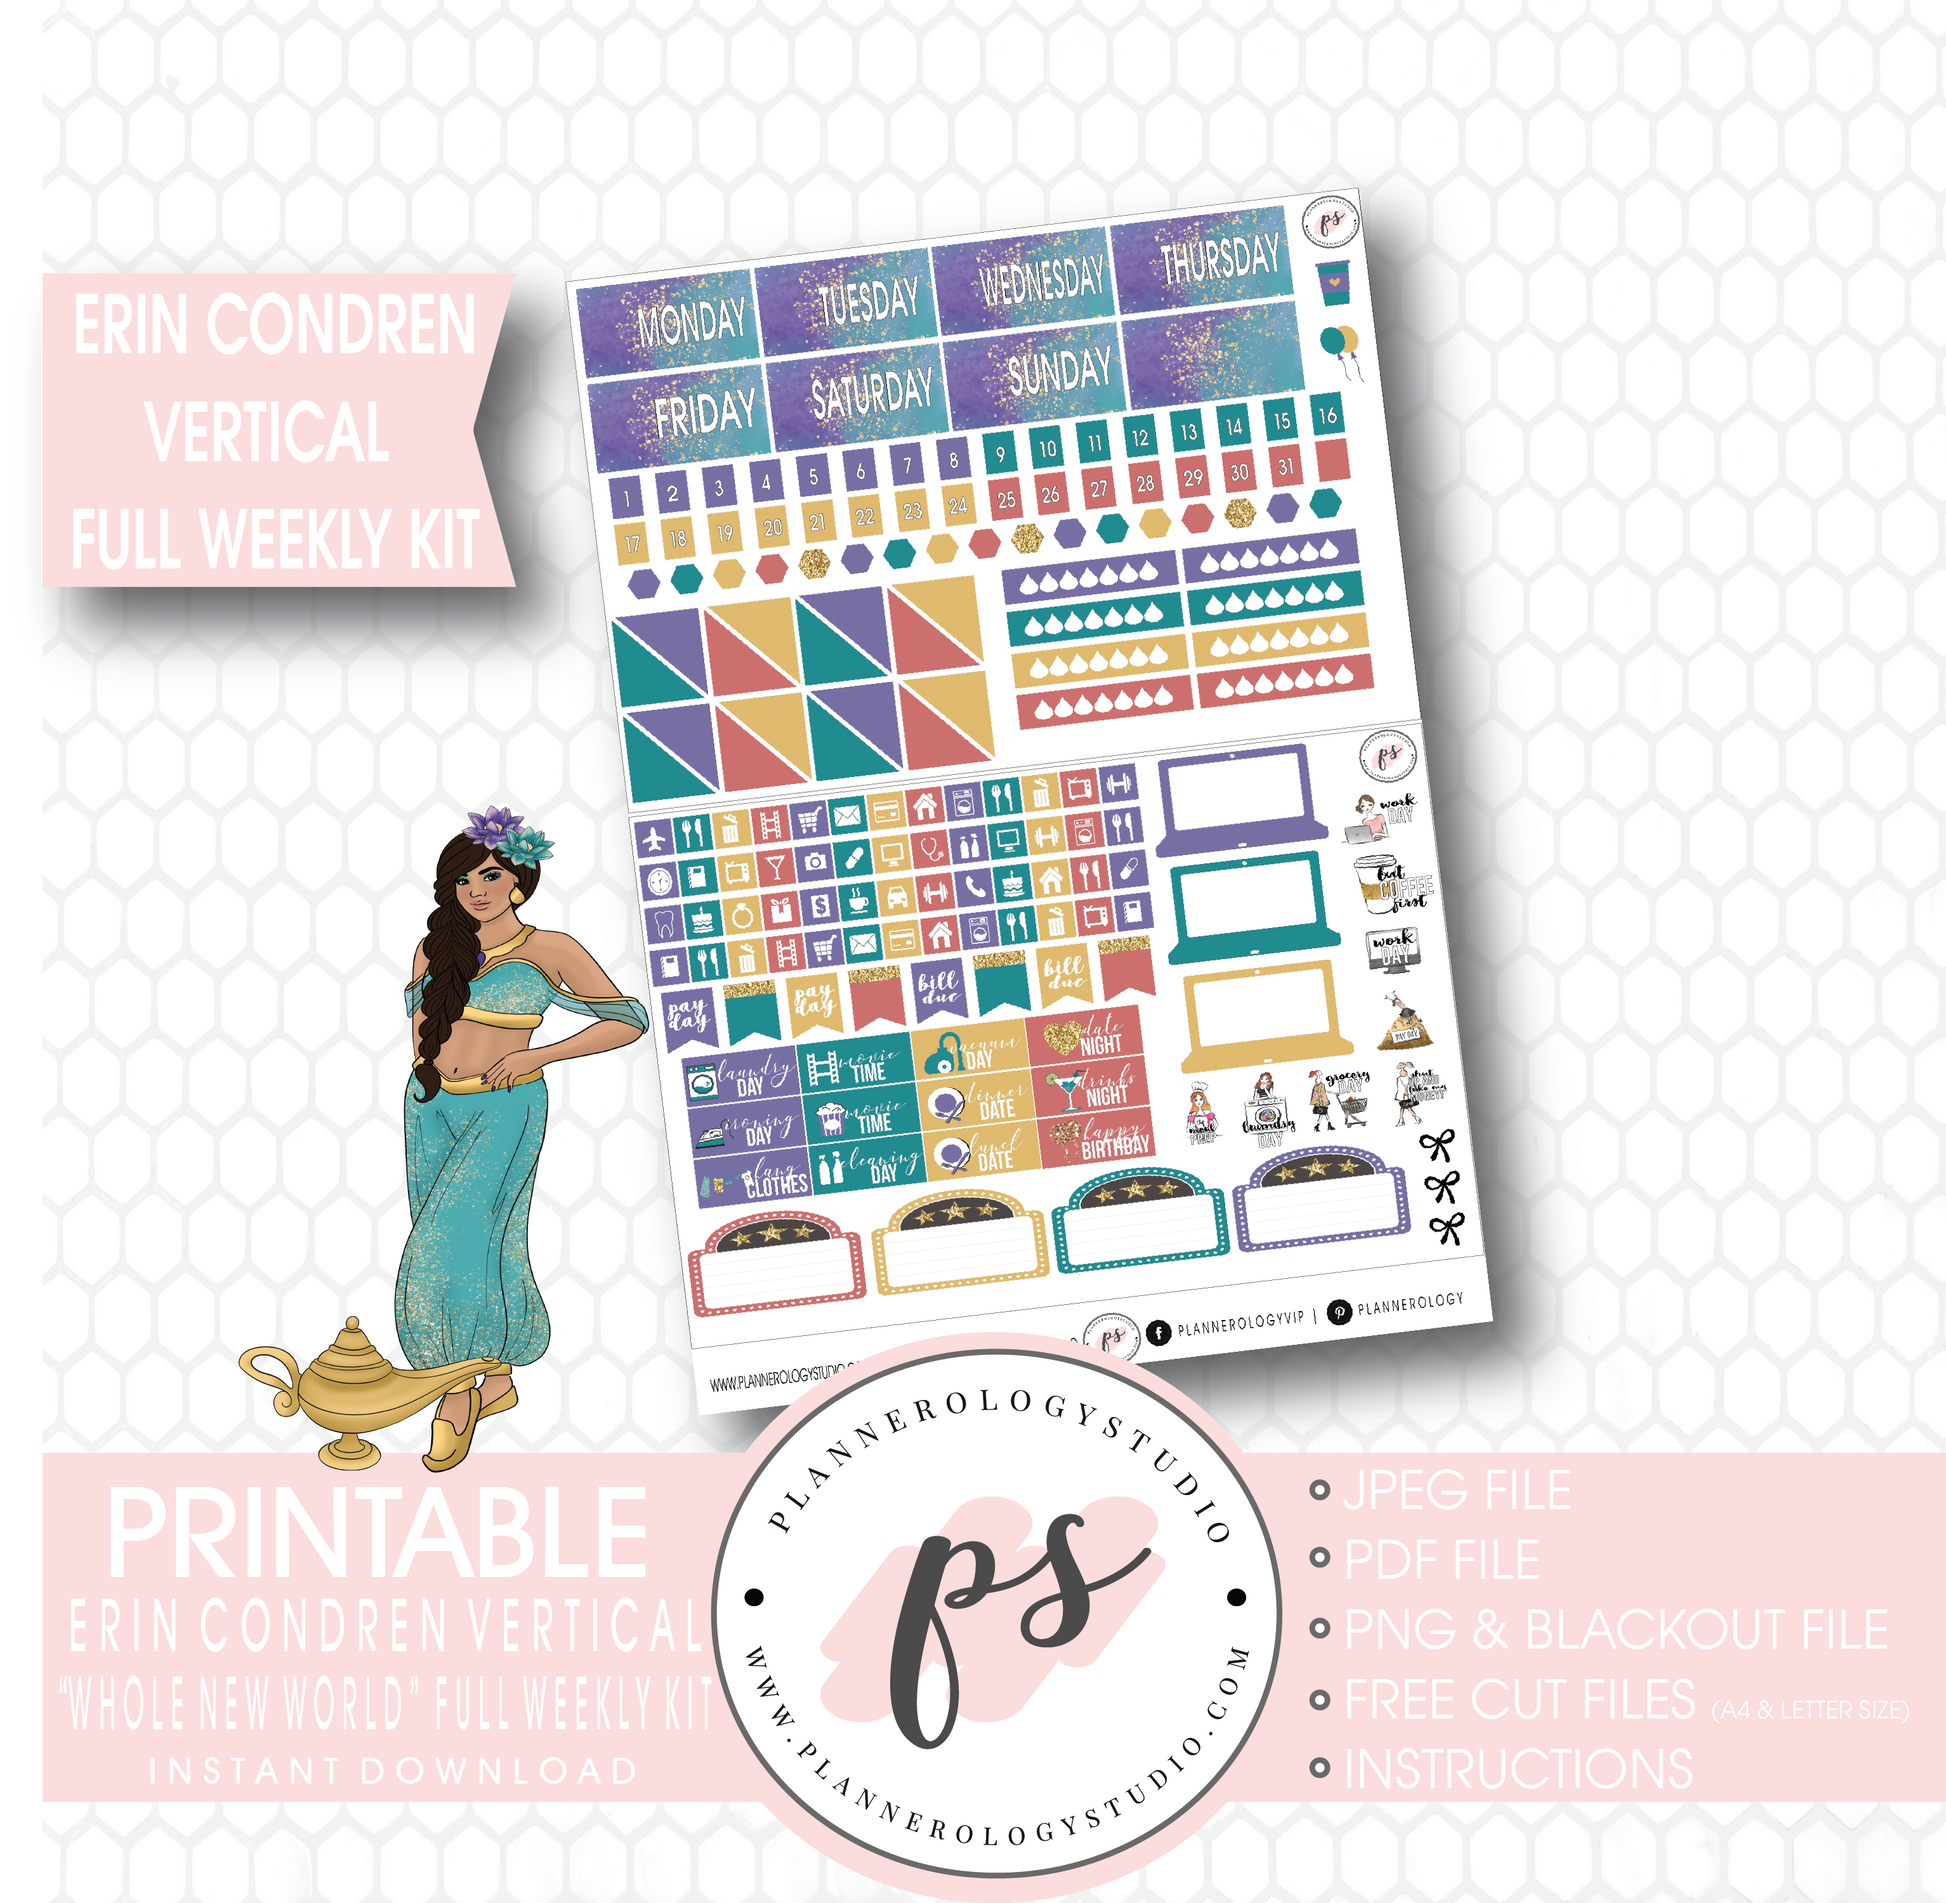 Whole New World (Aladdin Inspired) Full Weekly Kit Printable Planner Stickers (for use with Erin Condren Vertical) - Plannerologystudio